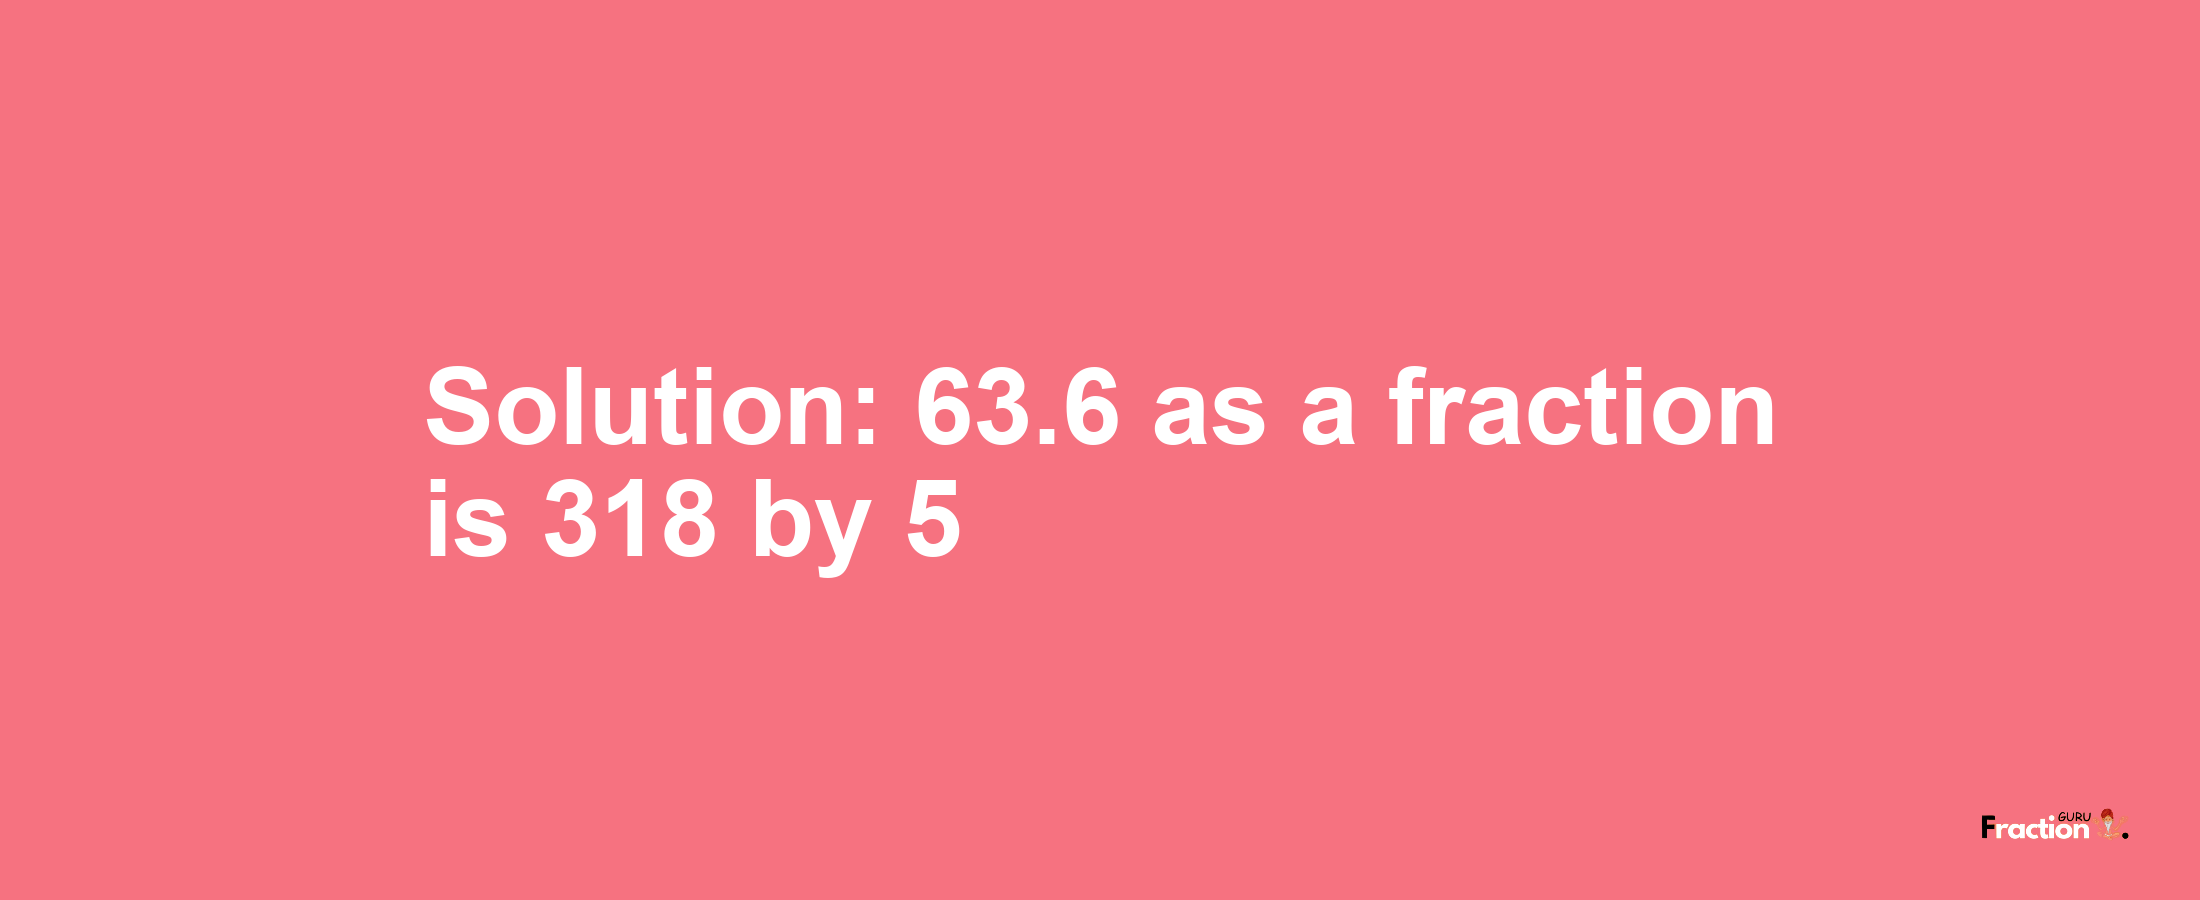 Solution:63.6 as a fraction is 318/5